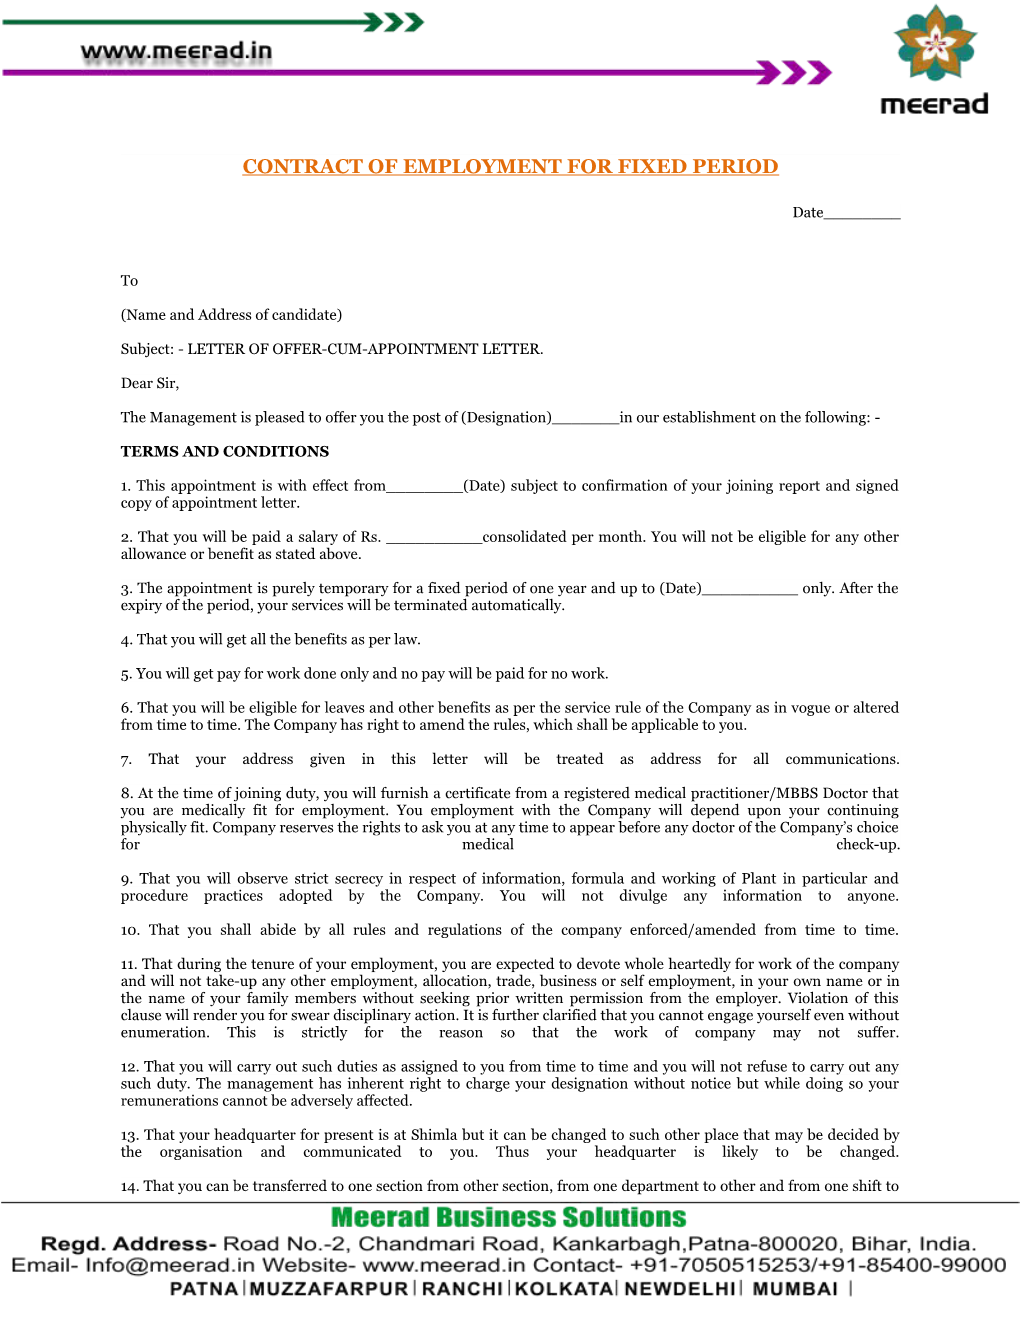 Contract of Employment for Fixed Period